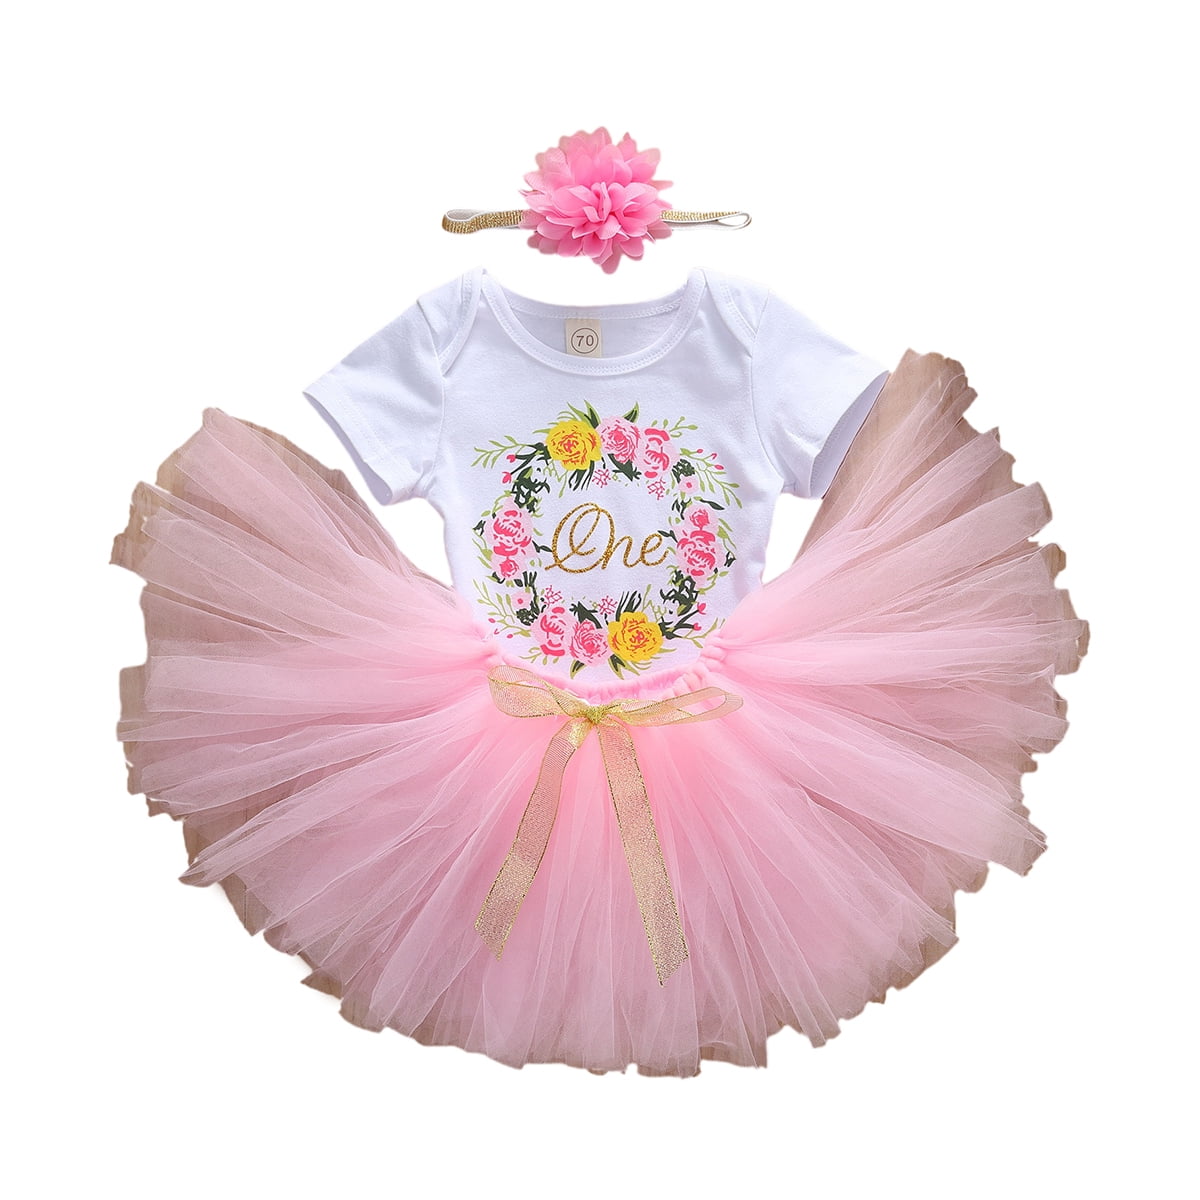 3Pcs Infant Baby Girl Birthday Outfit Floral Print One Romper Bodysuit Tops+Tutu Skirt Dress+Headband Clothing Sets